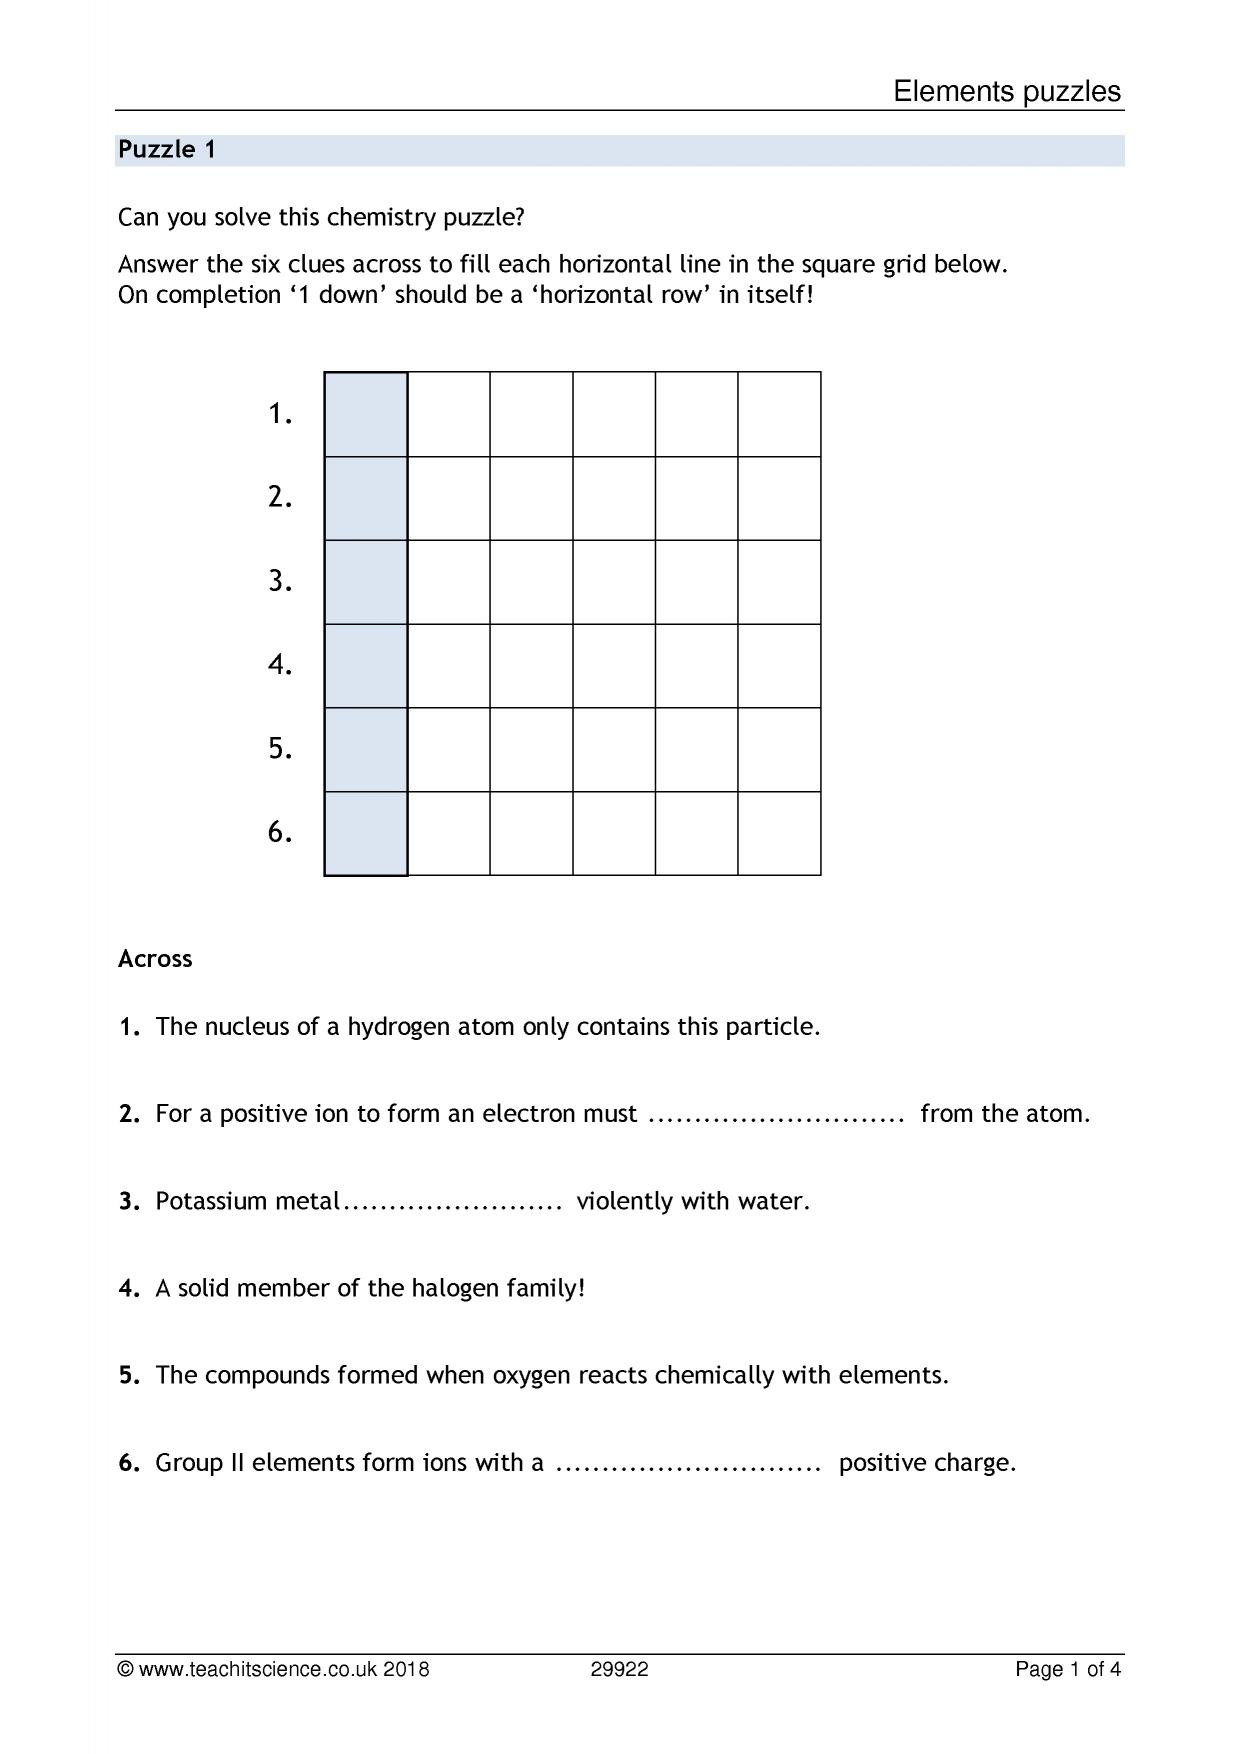 Atoms Vs Ions Worksheet Answers Elements Puzzles